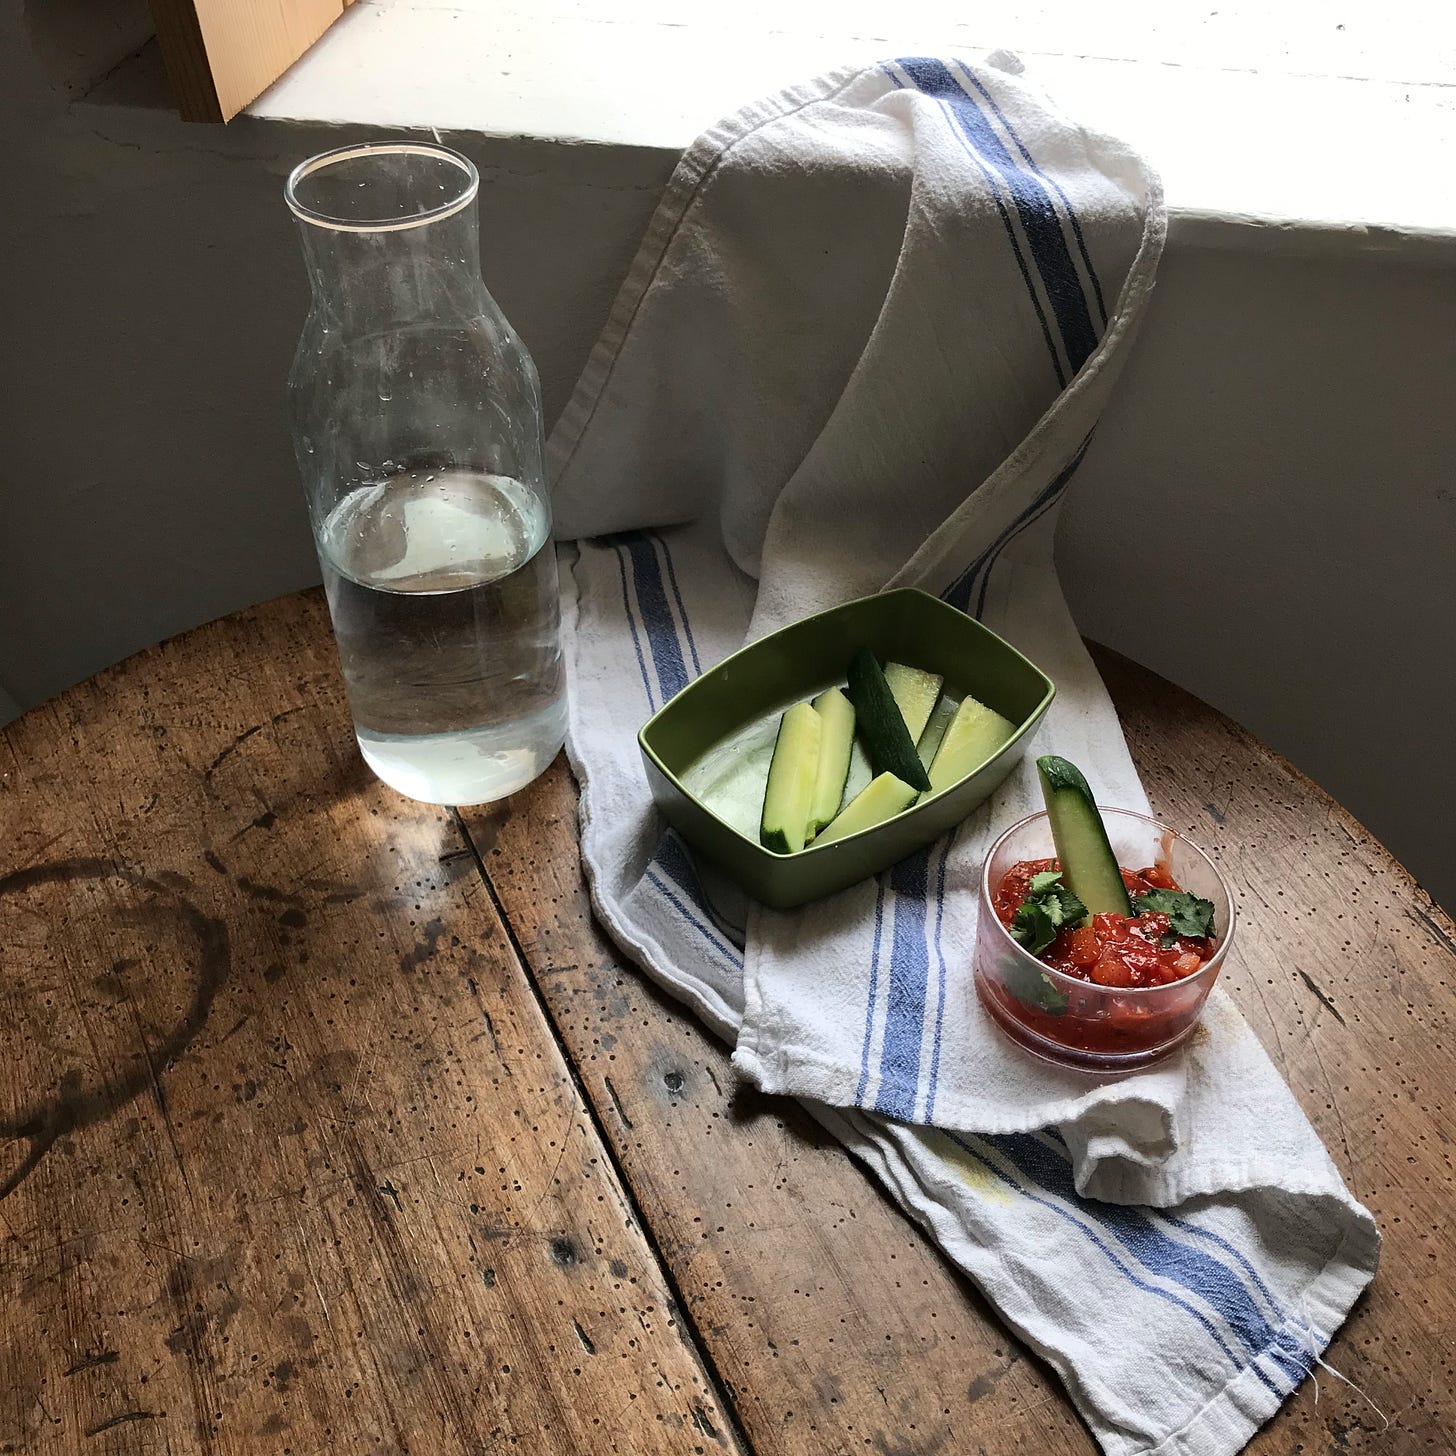 A red salsa in one round dish, and green batons of cucumber, on the same table, now bare and dark brown, with water, with a tea towel draped.